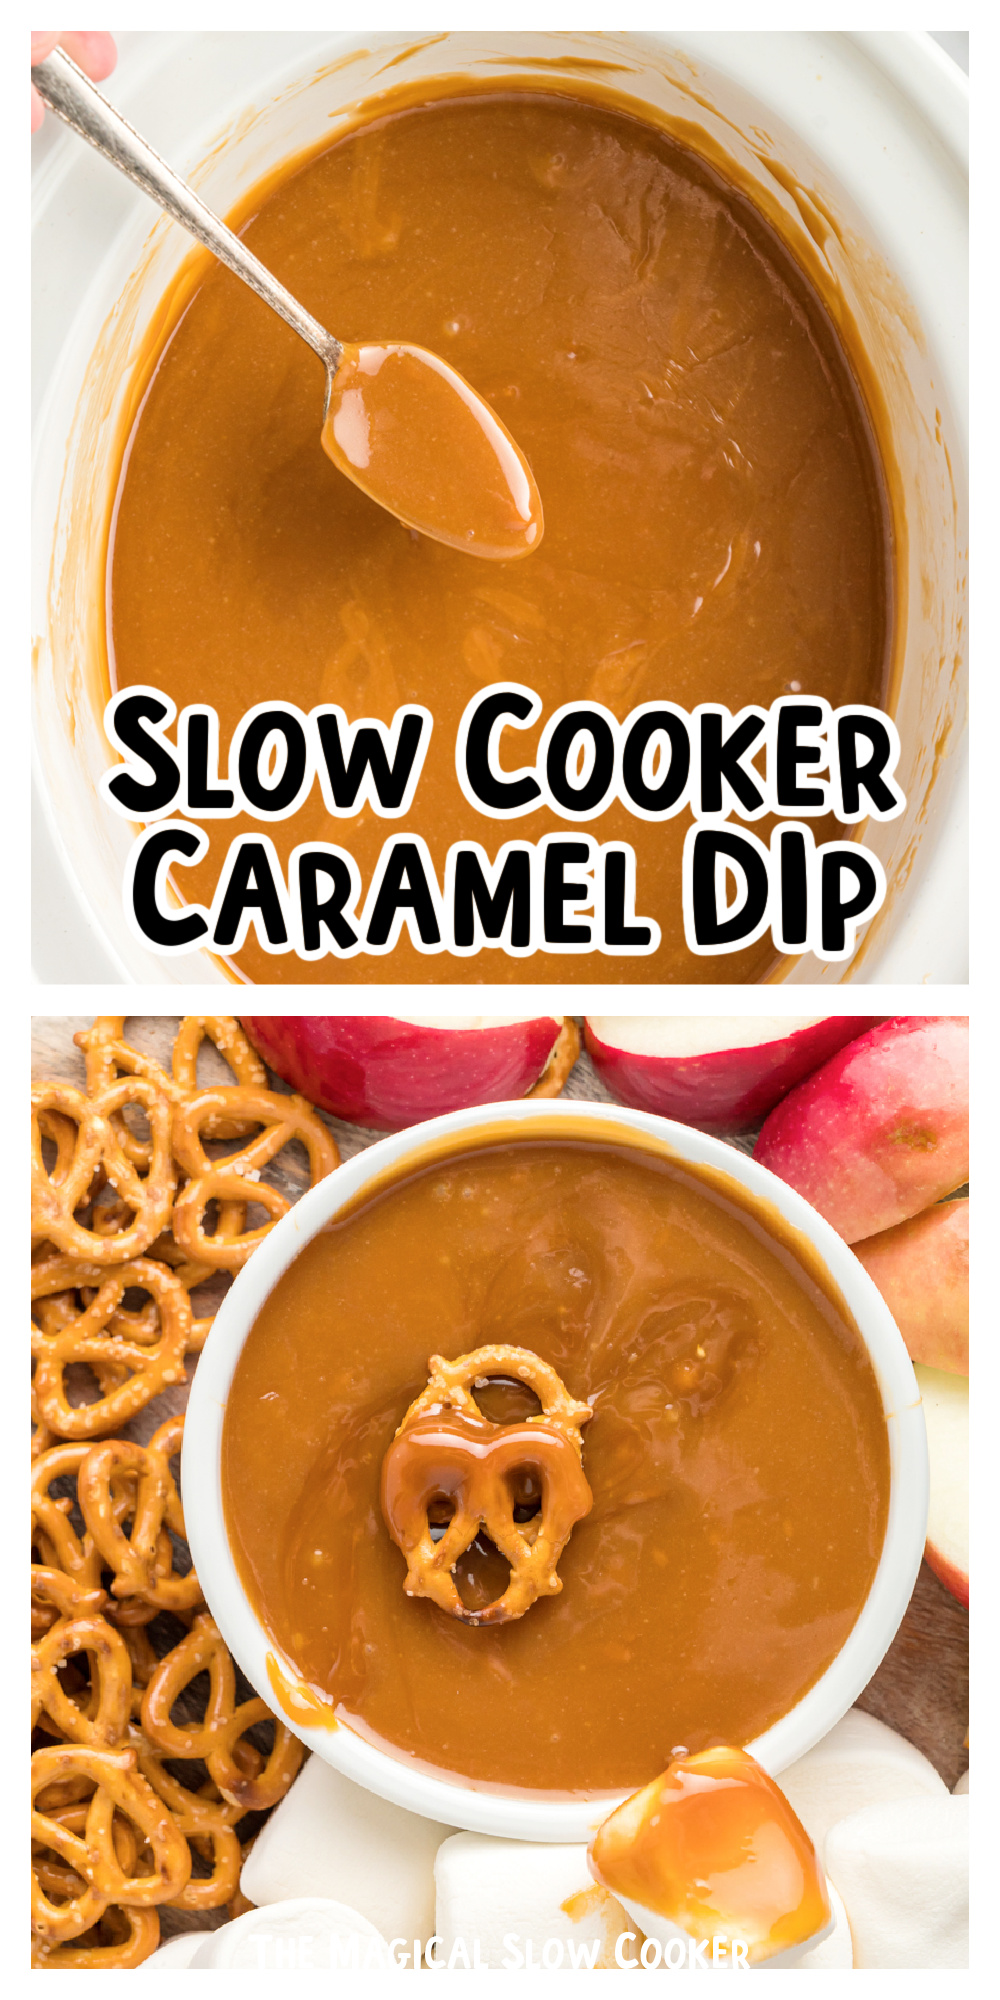 Slow Cooker Caramel Dip - The Magical Slow Cooker